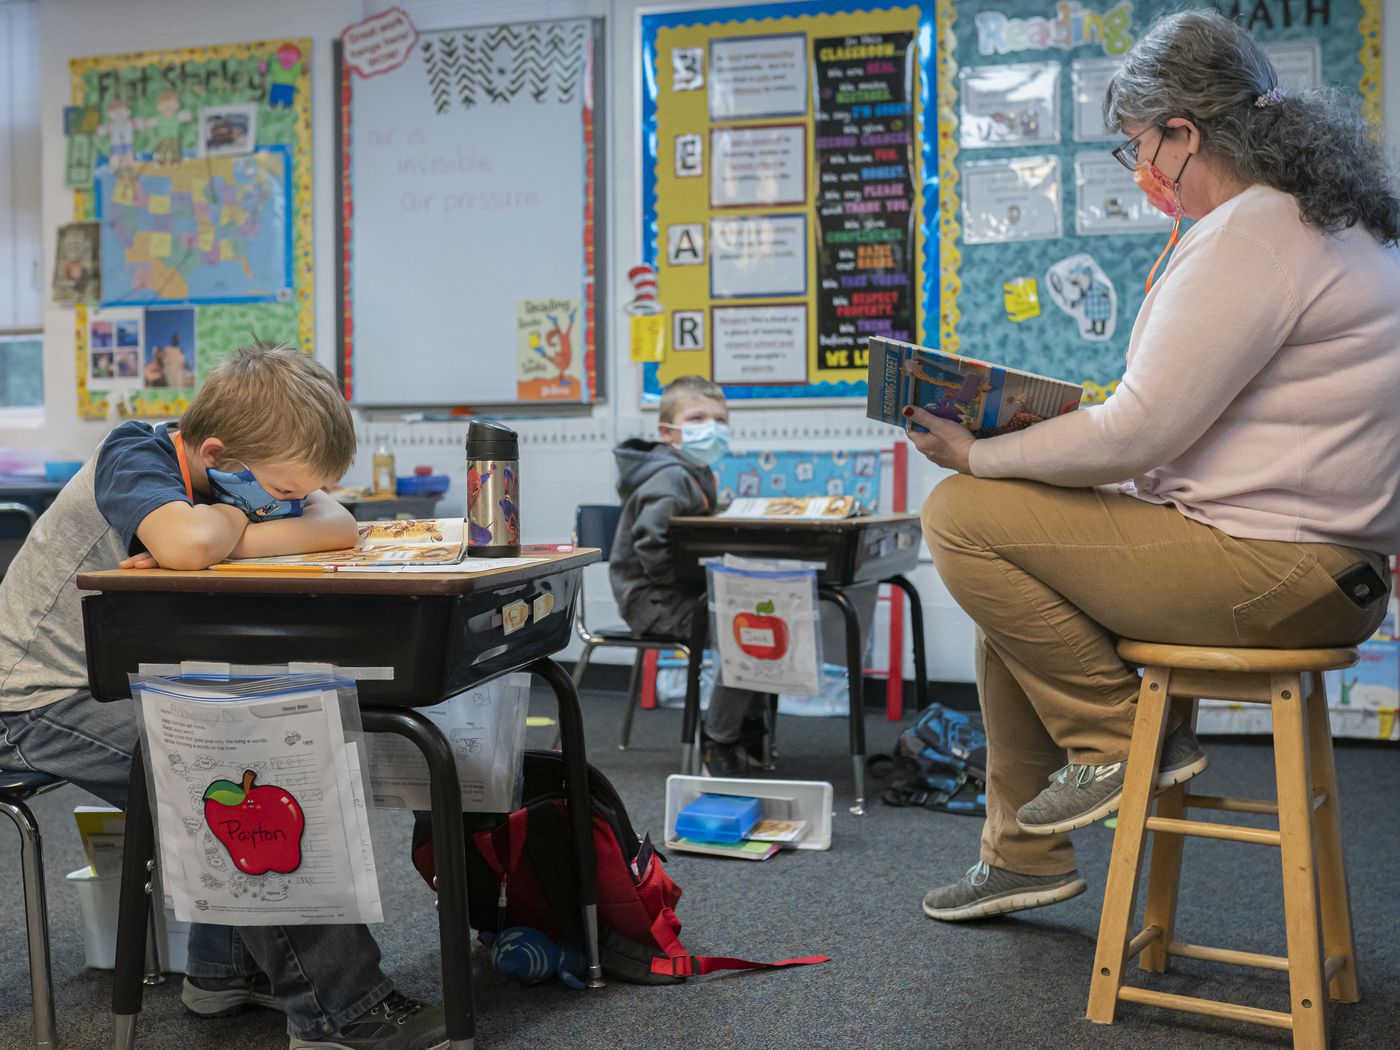 Cherry Creek To Switch To Reading Curriculum Backed By Science - Chalkbeat Colorado